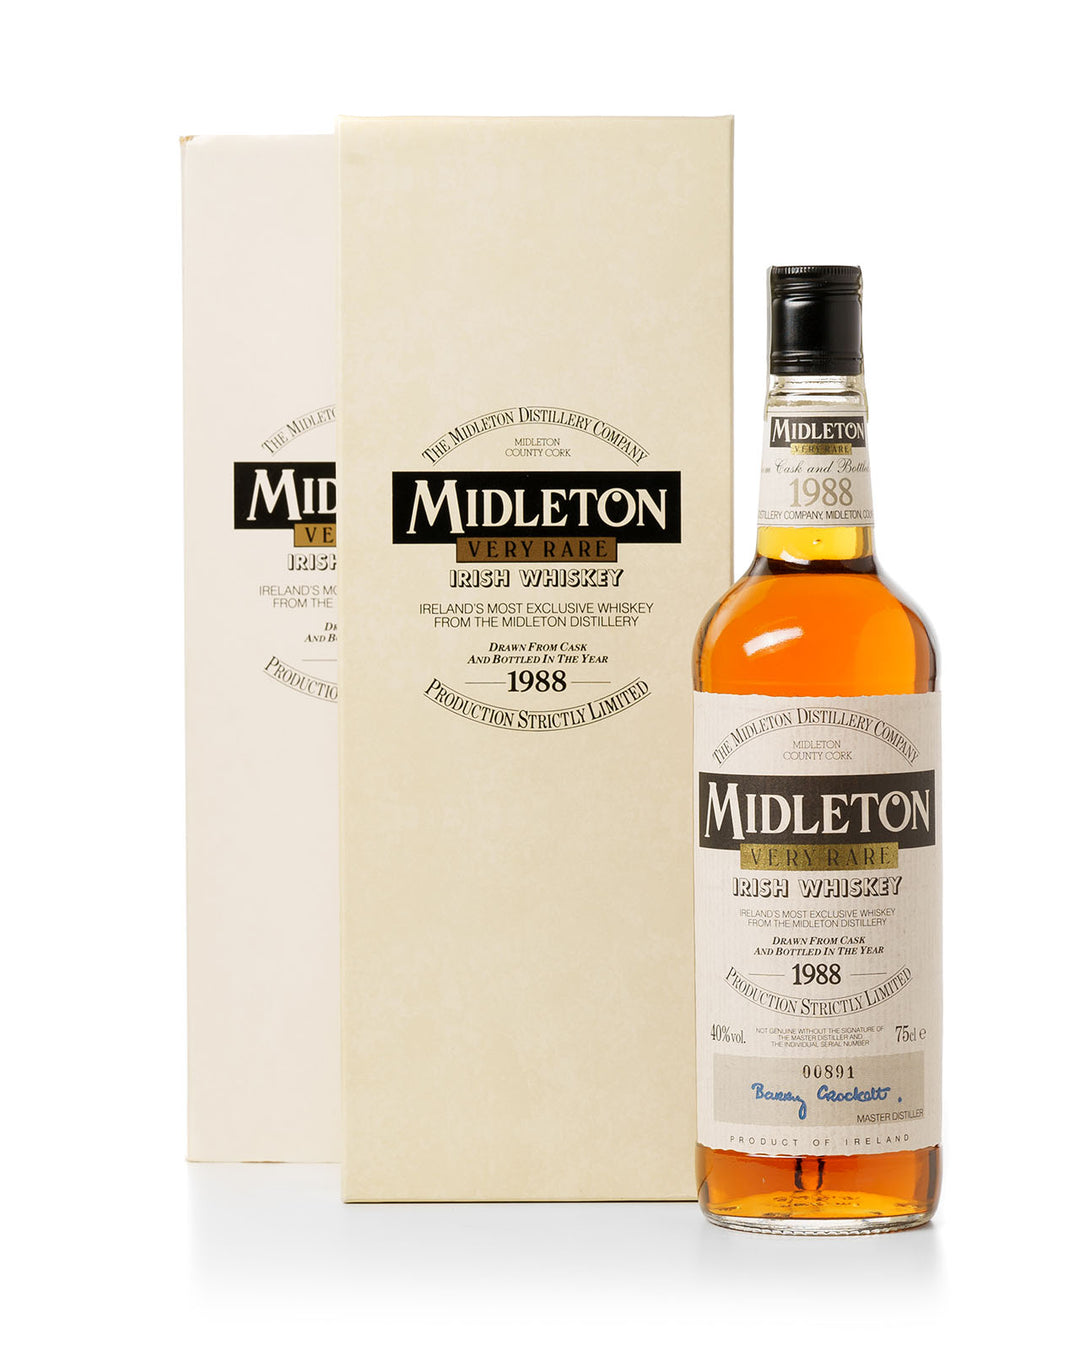 Midleton Very Rare Bottled 1988 75cl With Original Box and Certificate